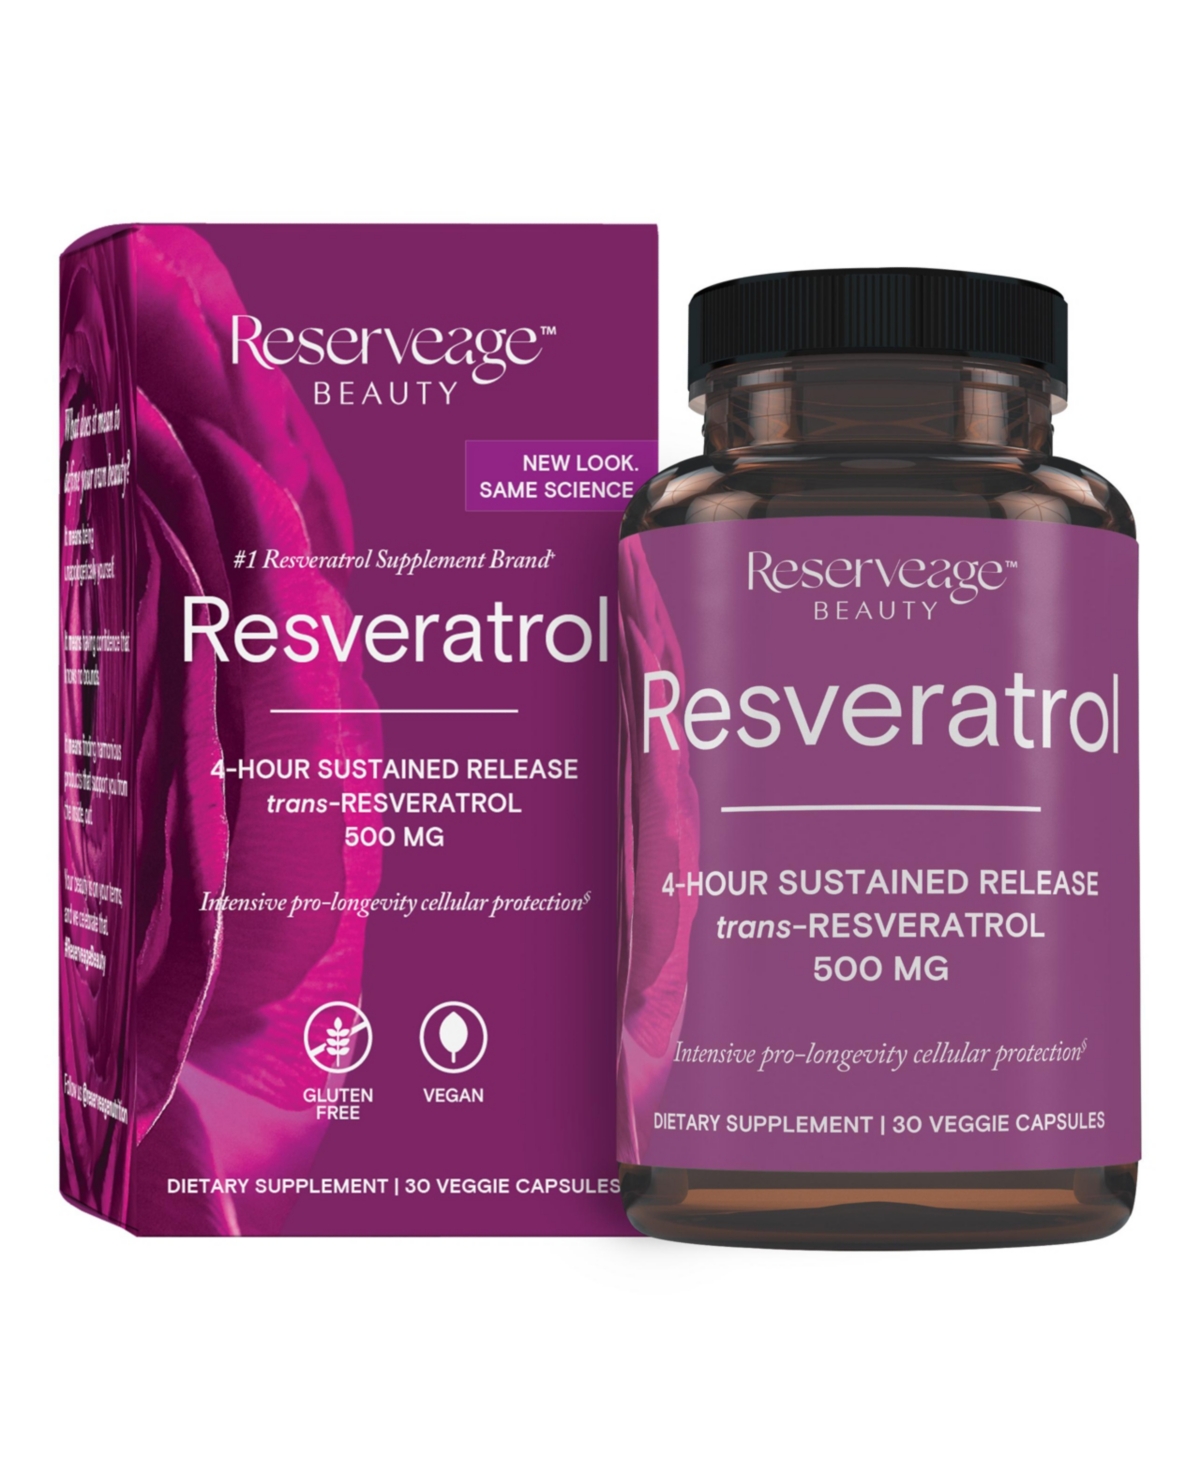 Resveratrol 500 mg, Antioxidant Supplement for Heart and Cellular Health, Supports Healthy Aging, Paleo, Keto, 30 Capsules